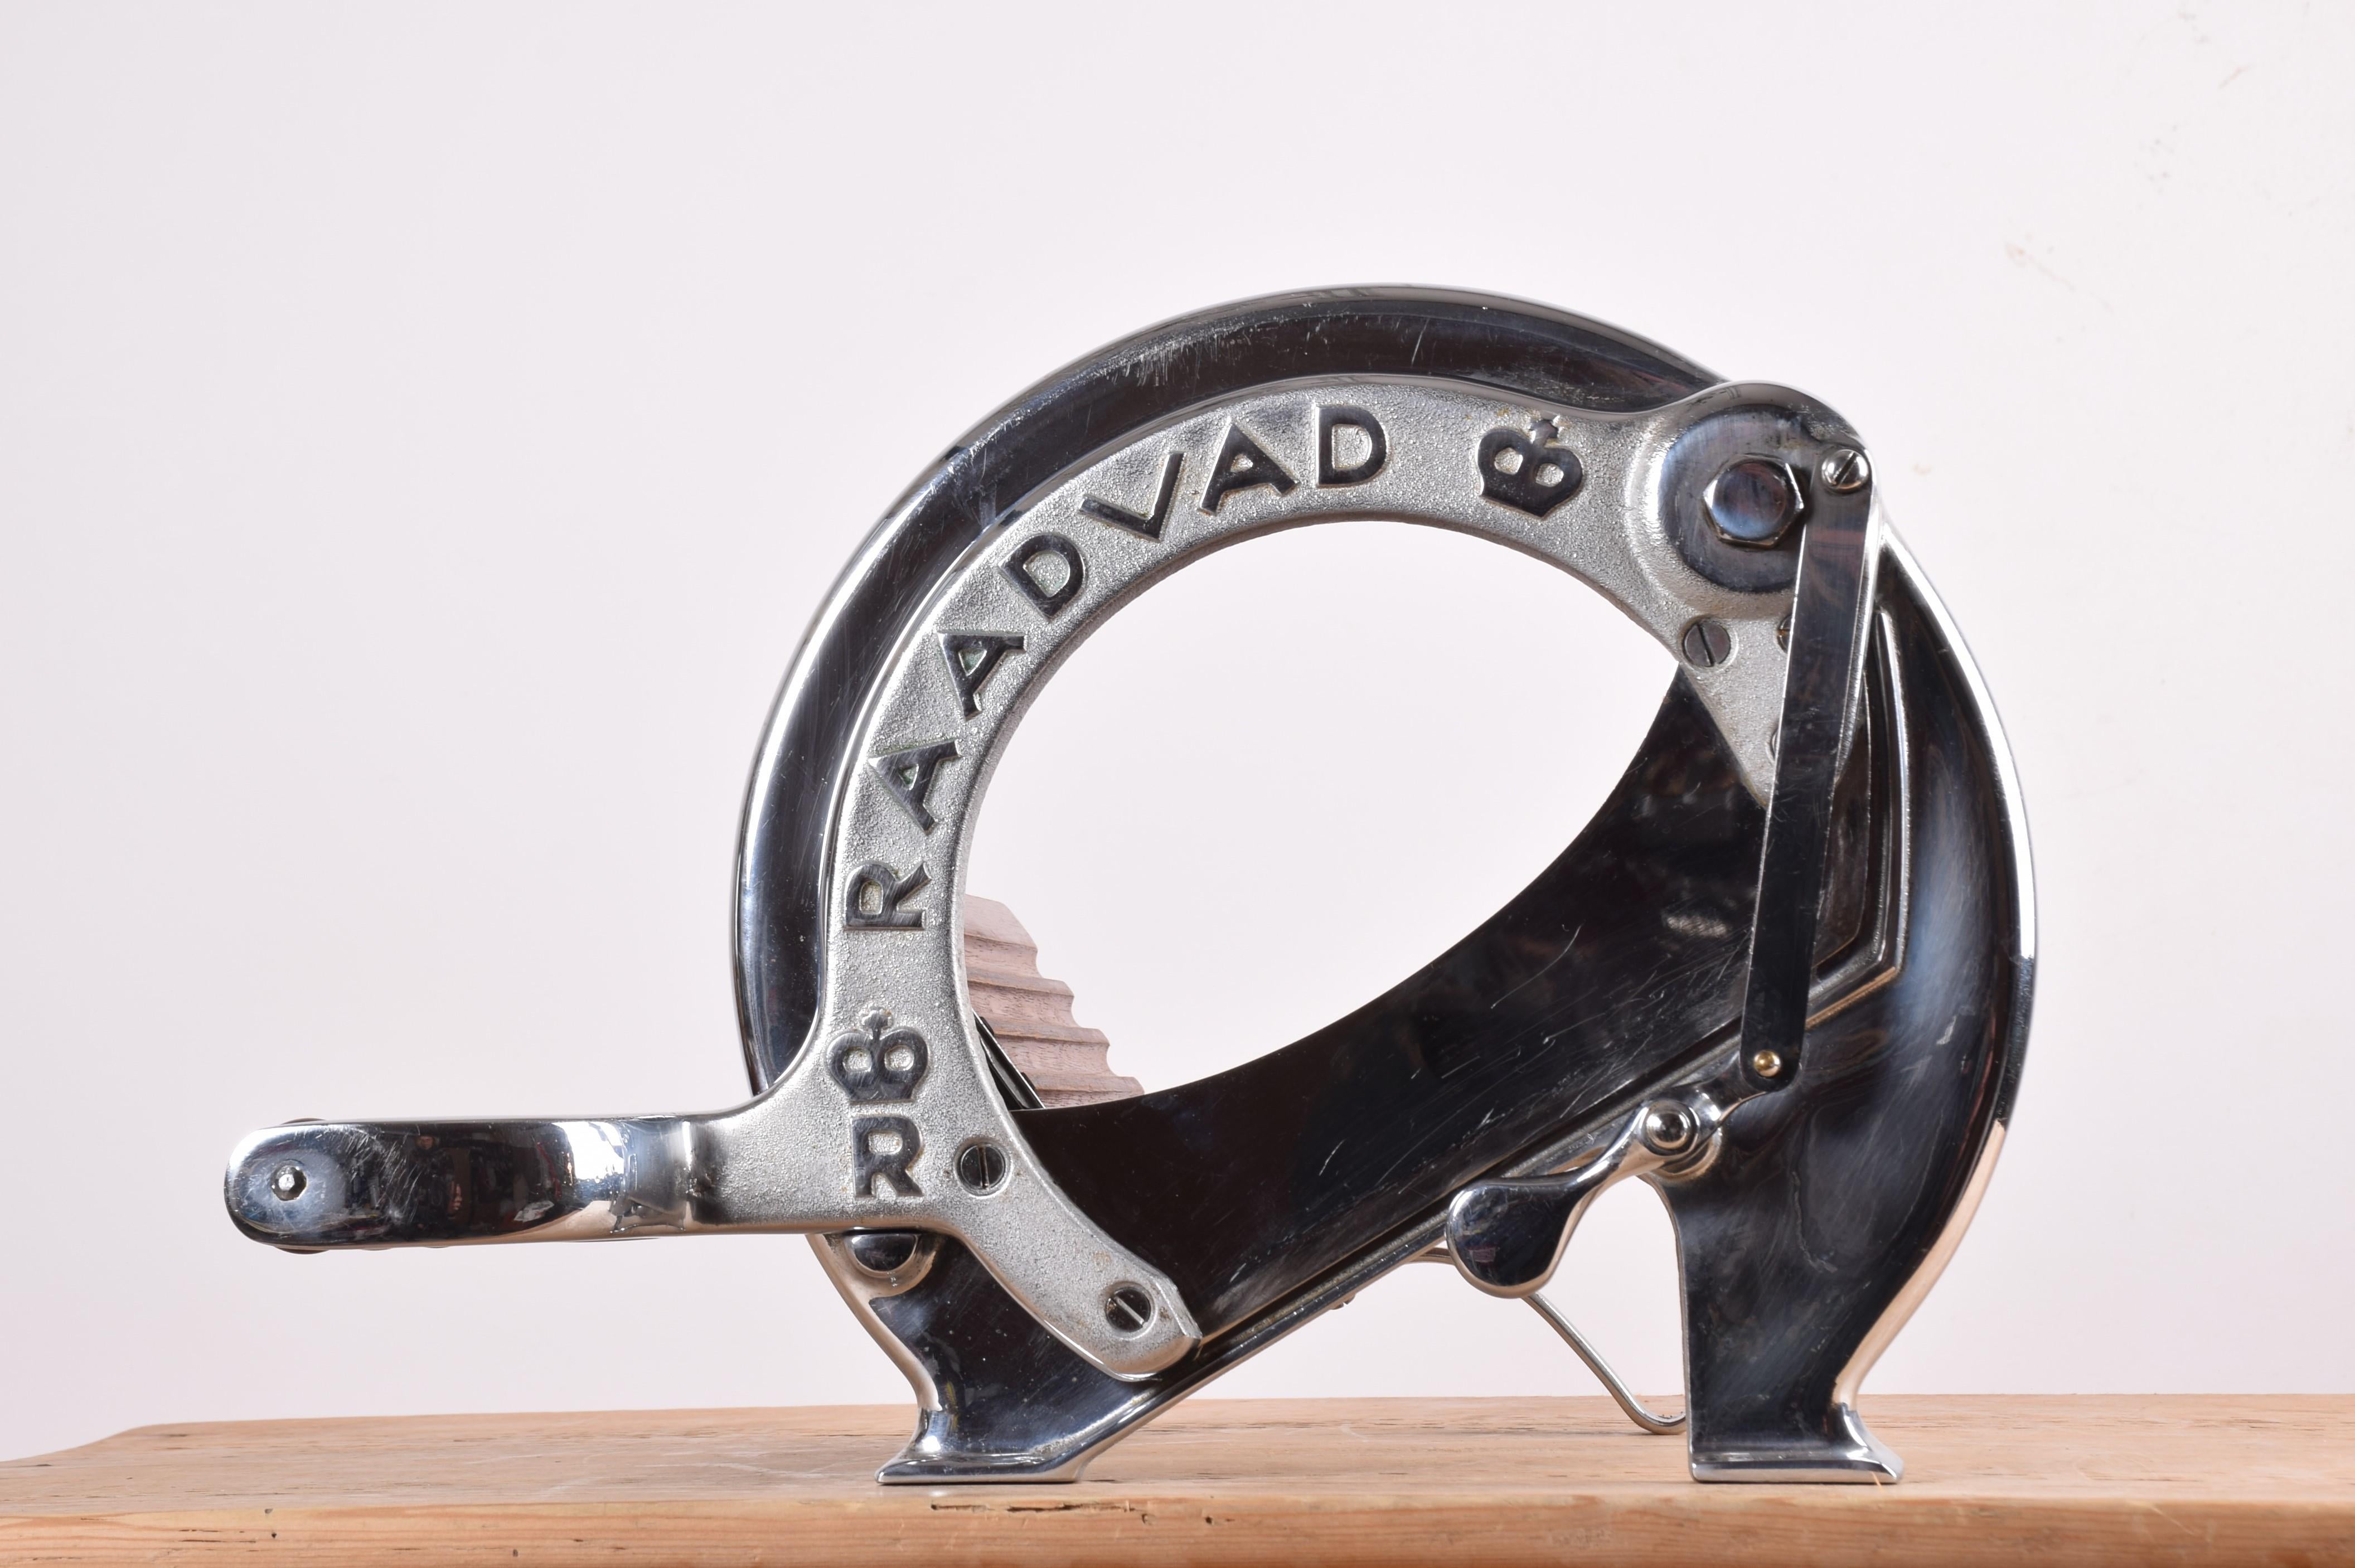 Original vintage Danish Raadvad bread slicer in the rare chrome version!

Manufactured by the famous Danish Company RAADVAD ca. 1950s. It is the model 294 which was designed by Ove Larsen in the 1930s and which has become a Danish design